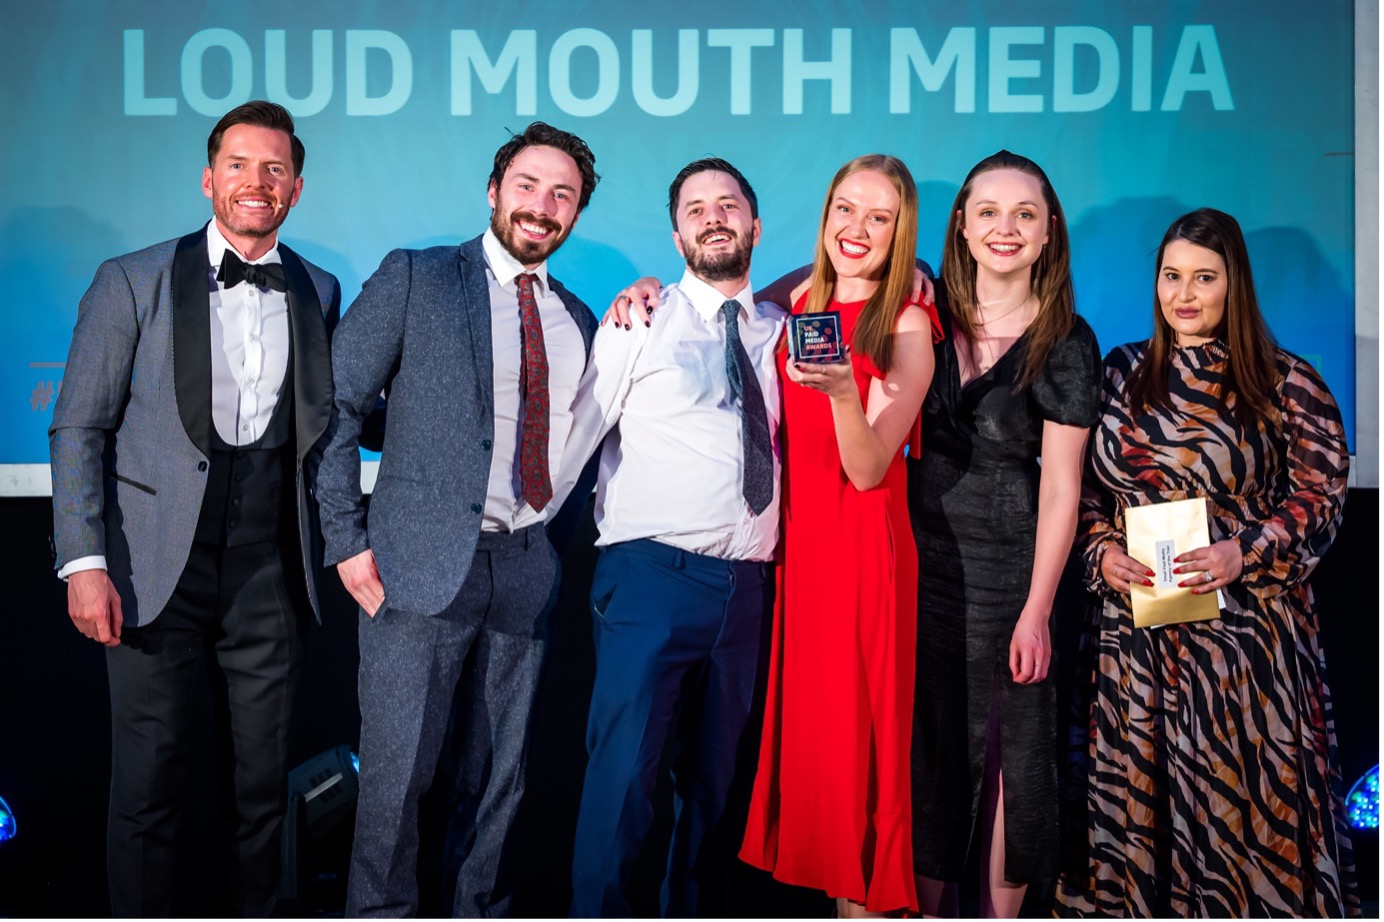 Image: LOUD MOUTH MEDIA SHORTLISTED FOR 5 AWARDS ON 4-DAYS A WEEK!